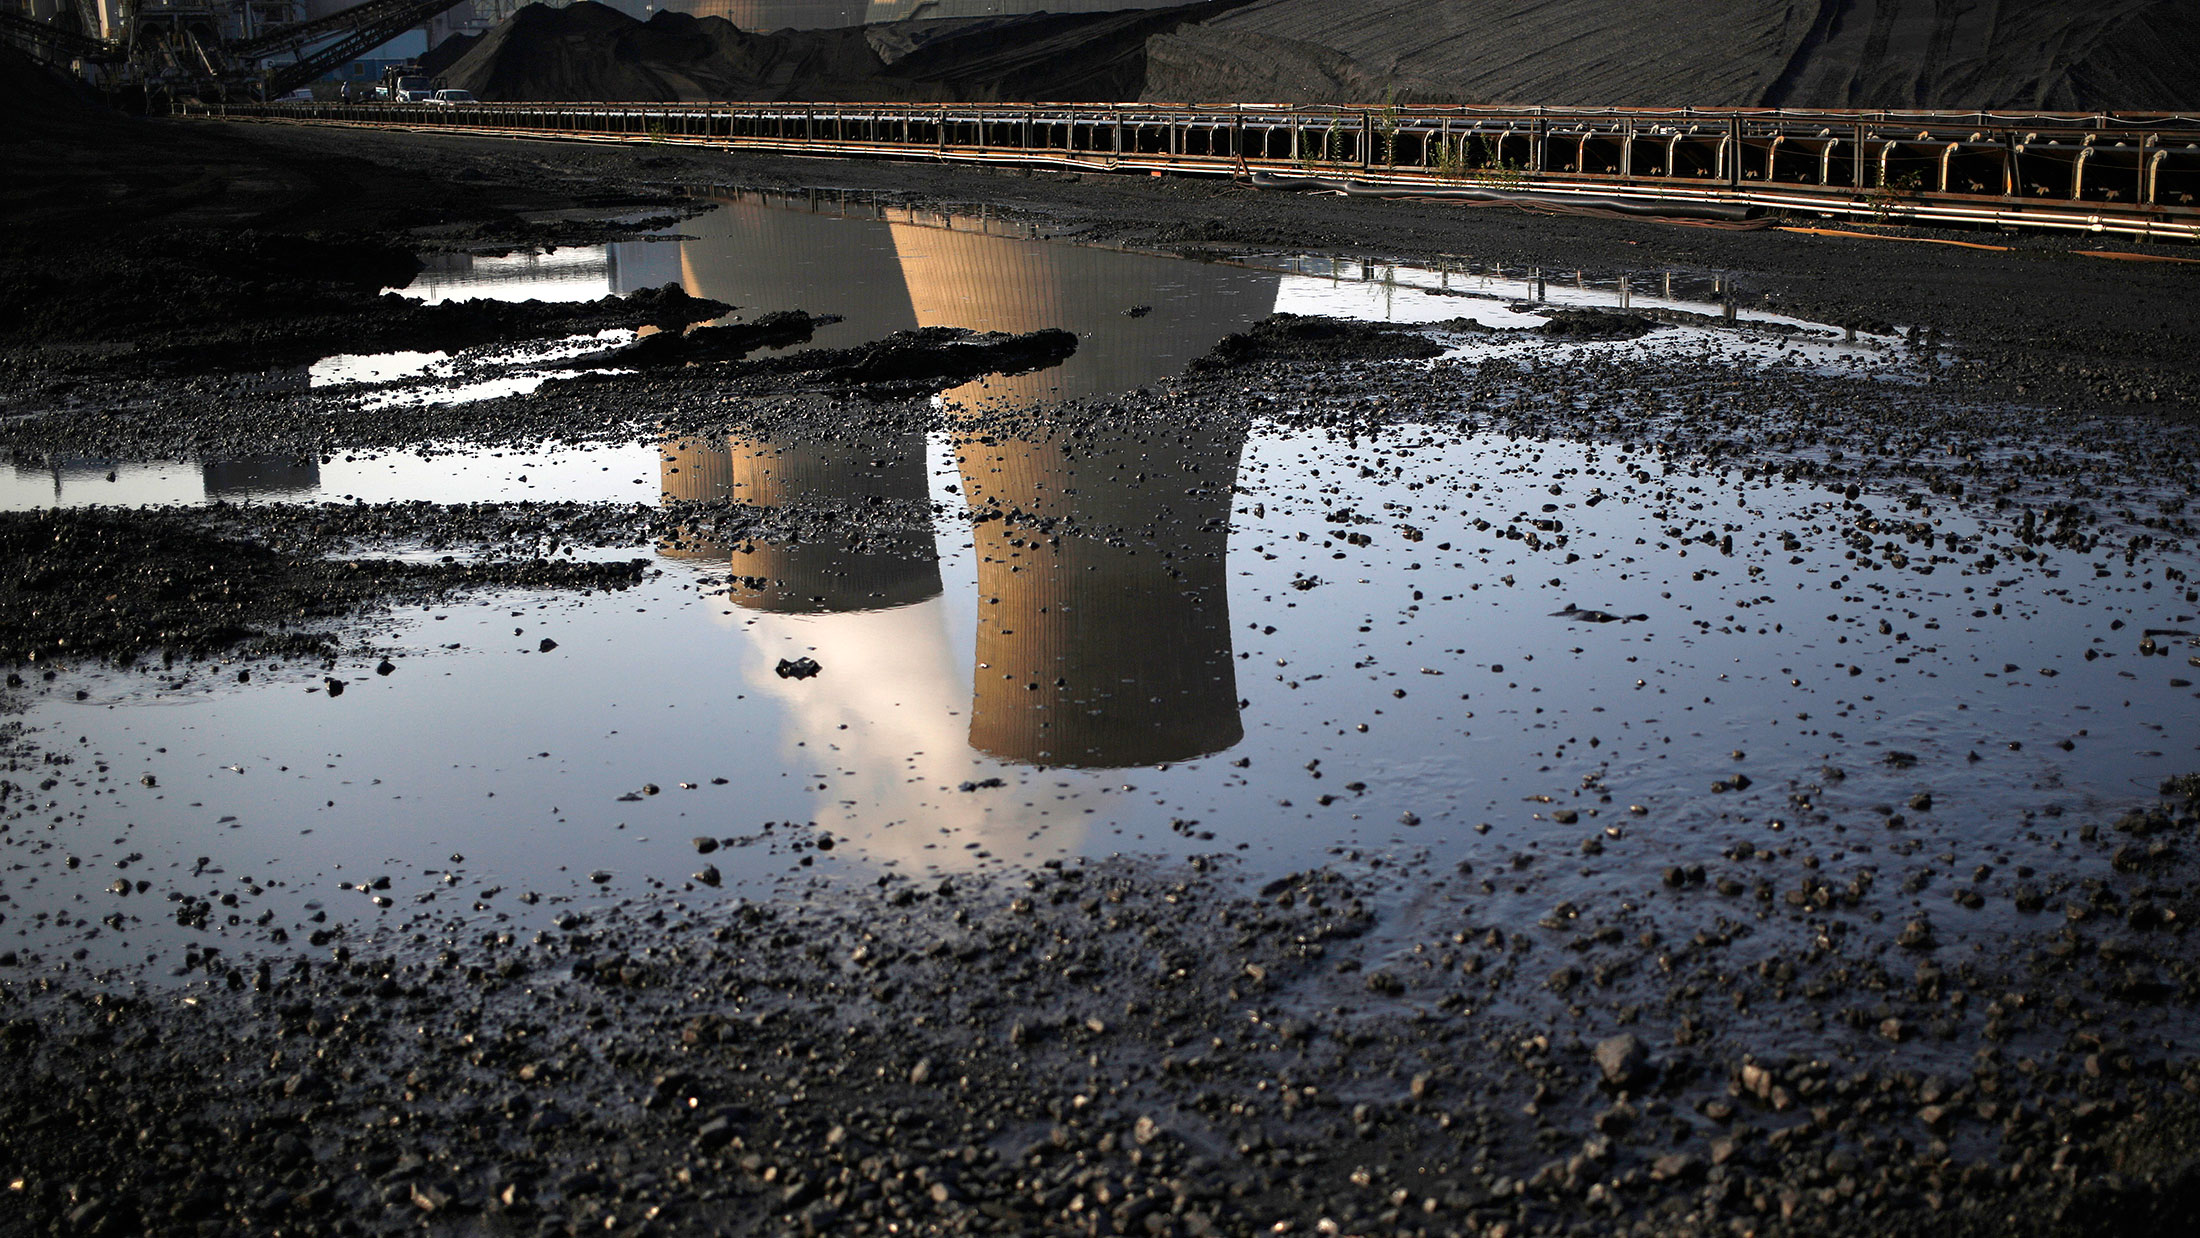 Cooling towers are reflected in a puddle in Winfield, West Virginia.
